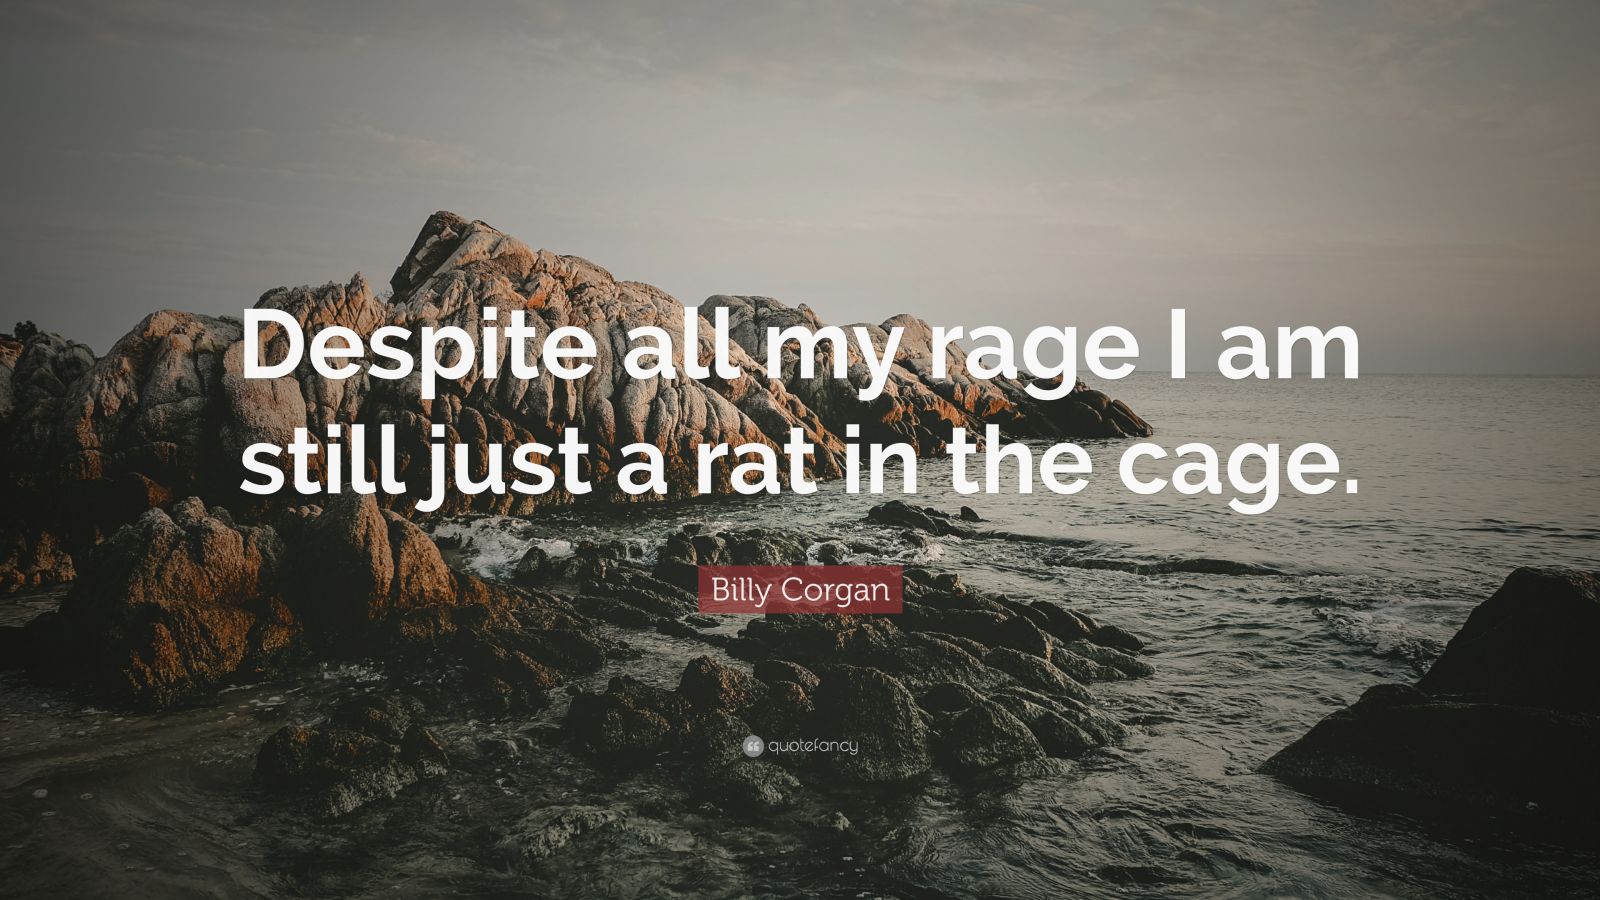 Billy Corgan Quote “despite All My Rage I Am Still Just A Rat In The Cage ” 12 Wallpapers